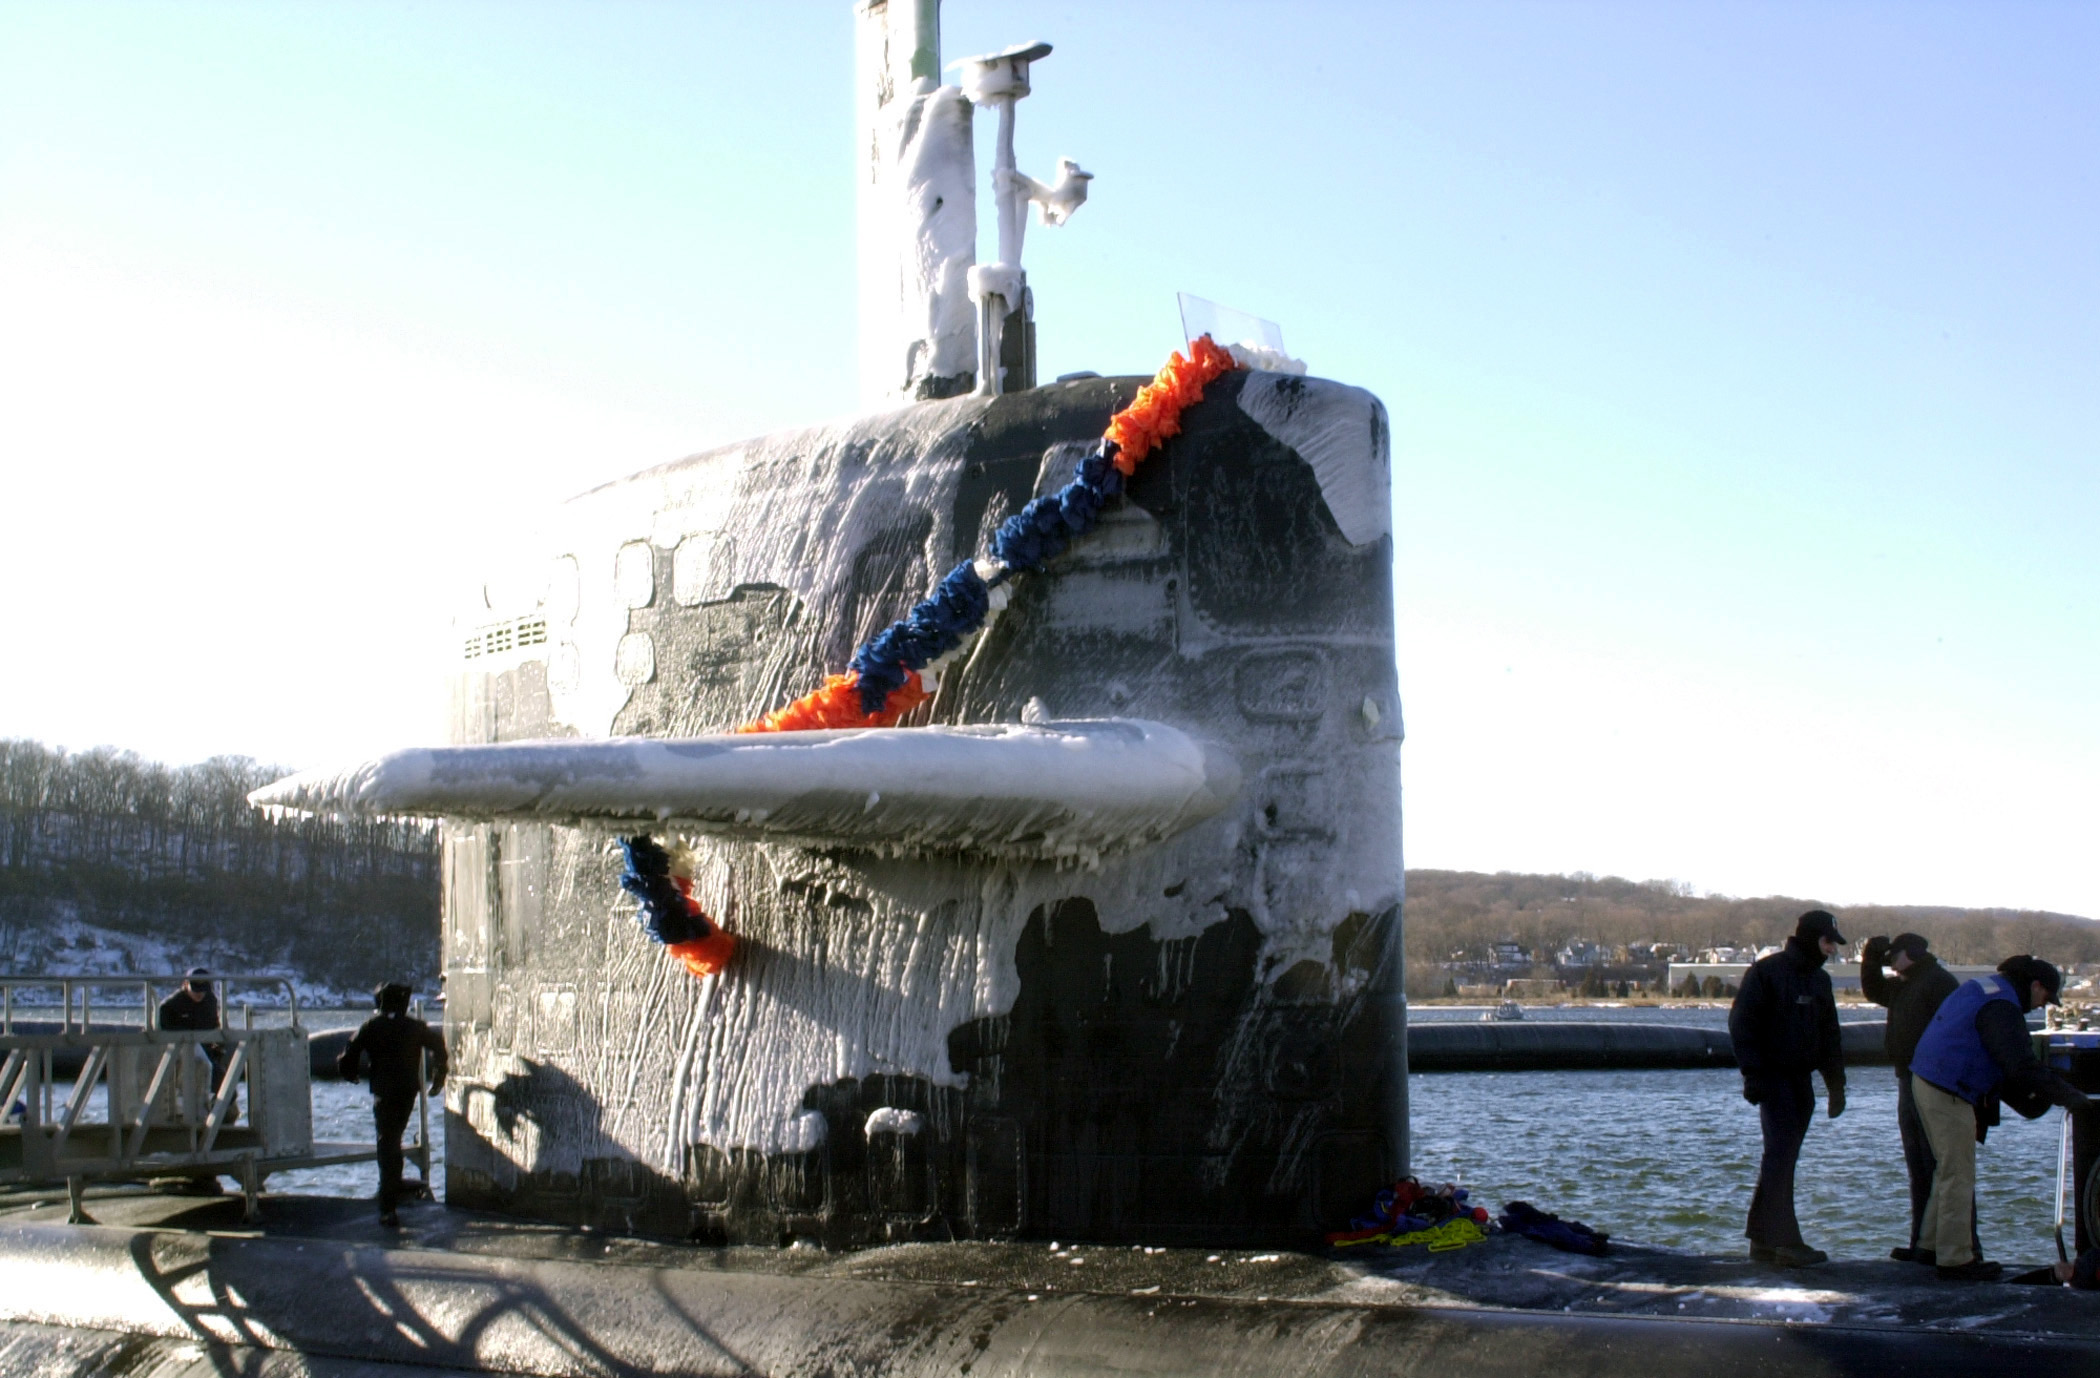 US Navy 040116-N-0247F-019 A sheet of ice covers the sail of the Los Angeles-class attack submarine USS Memphis (SSN 691)